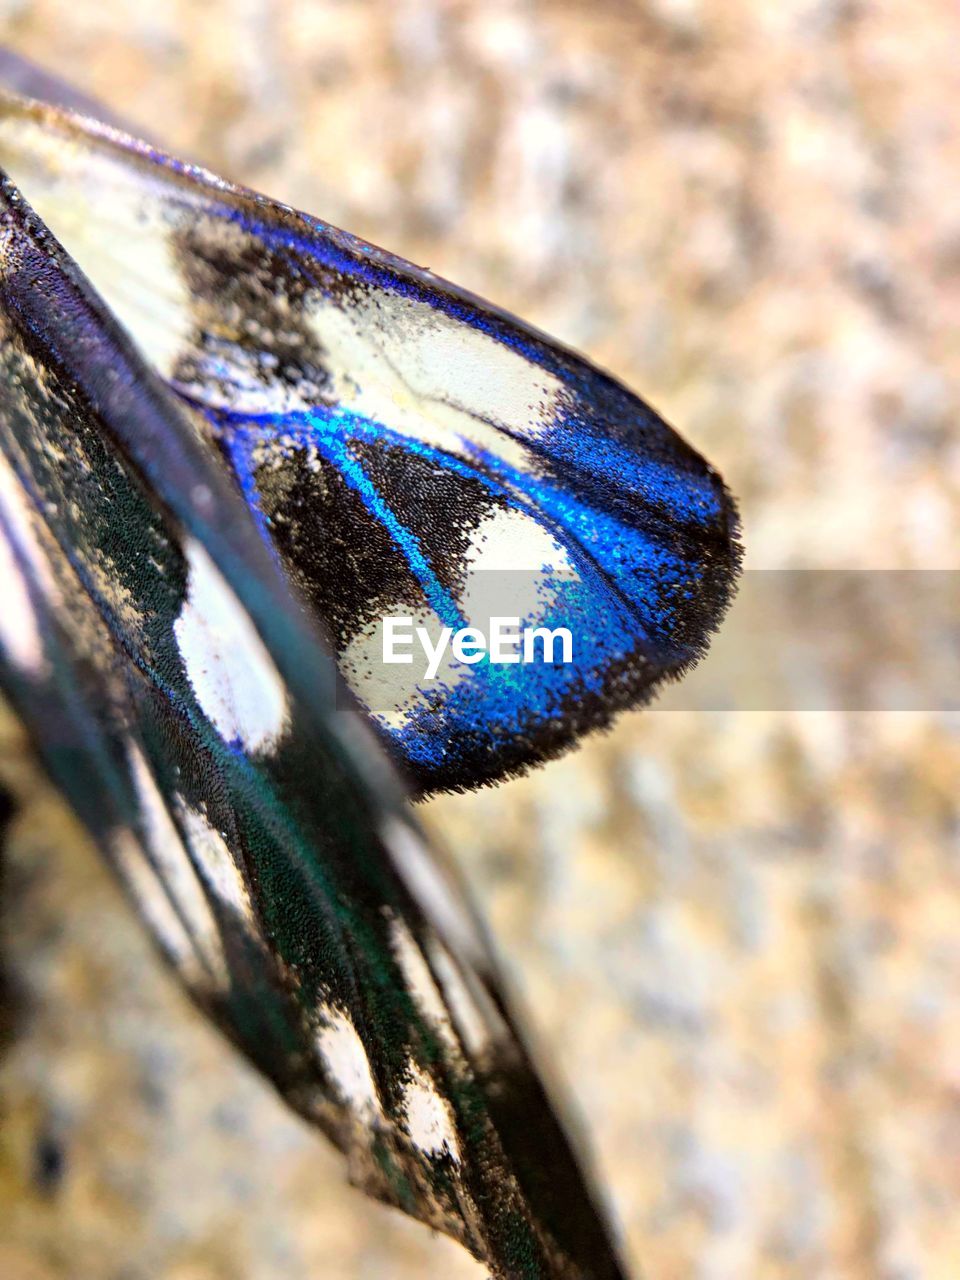 CLOSE-UP OF BUTTERFLY ON A METAL